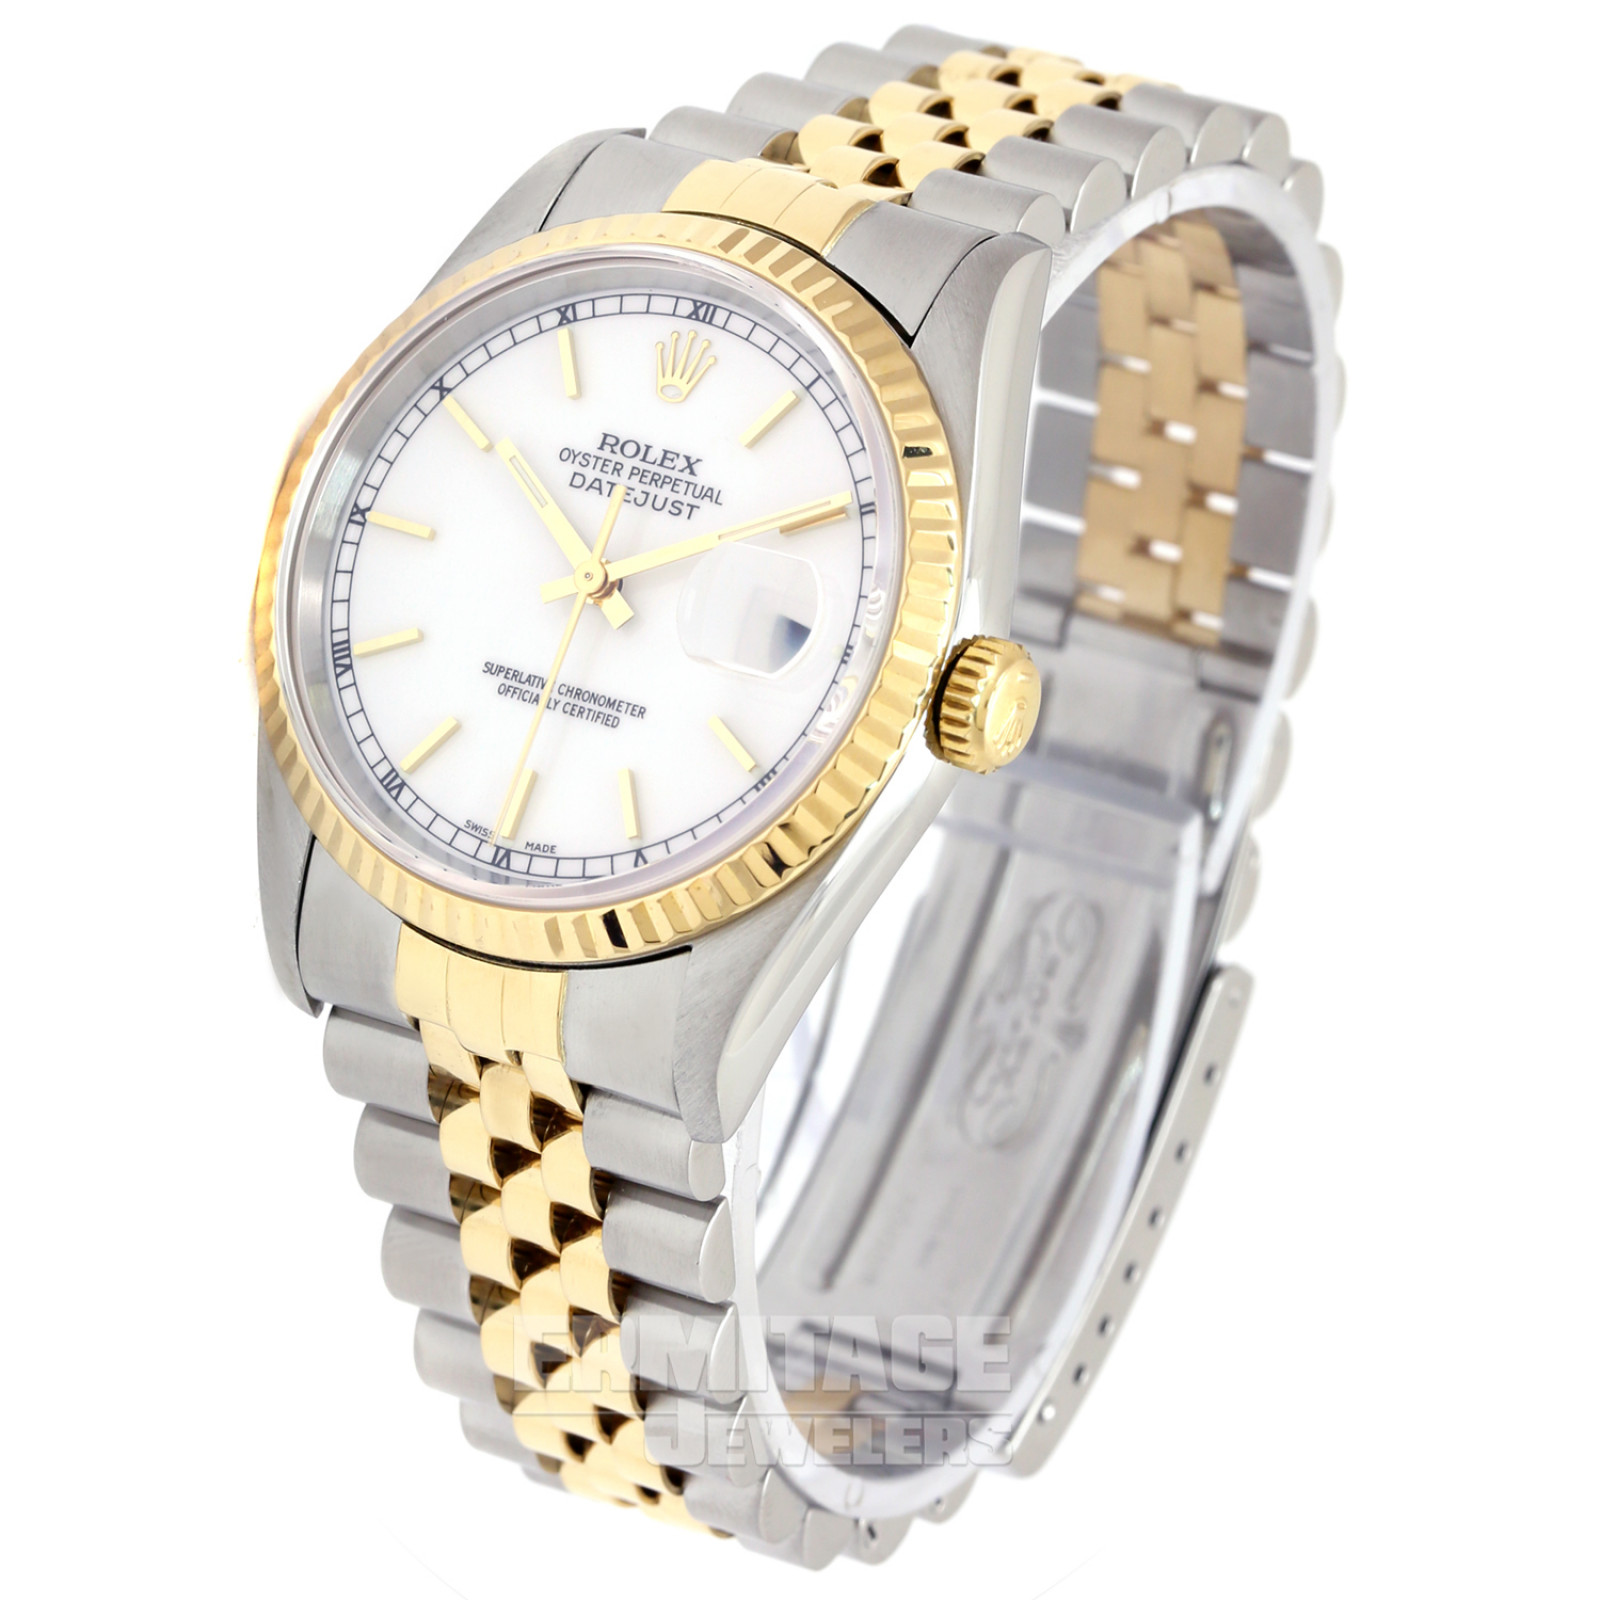 Rolex Datejust 16233 36 mm with Gold Index on White